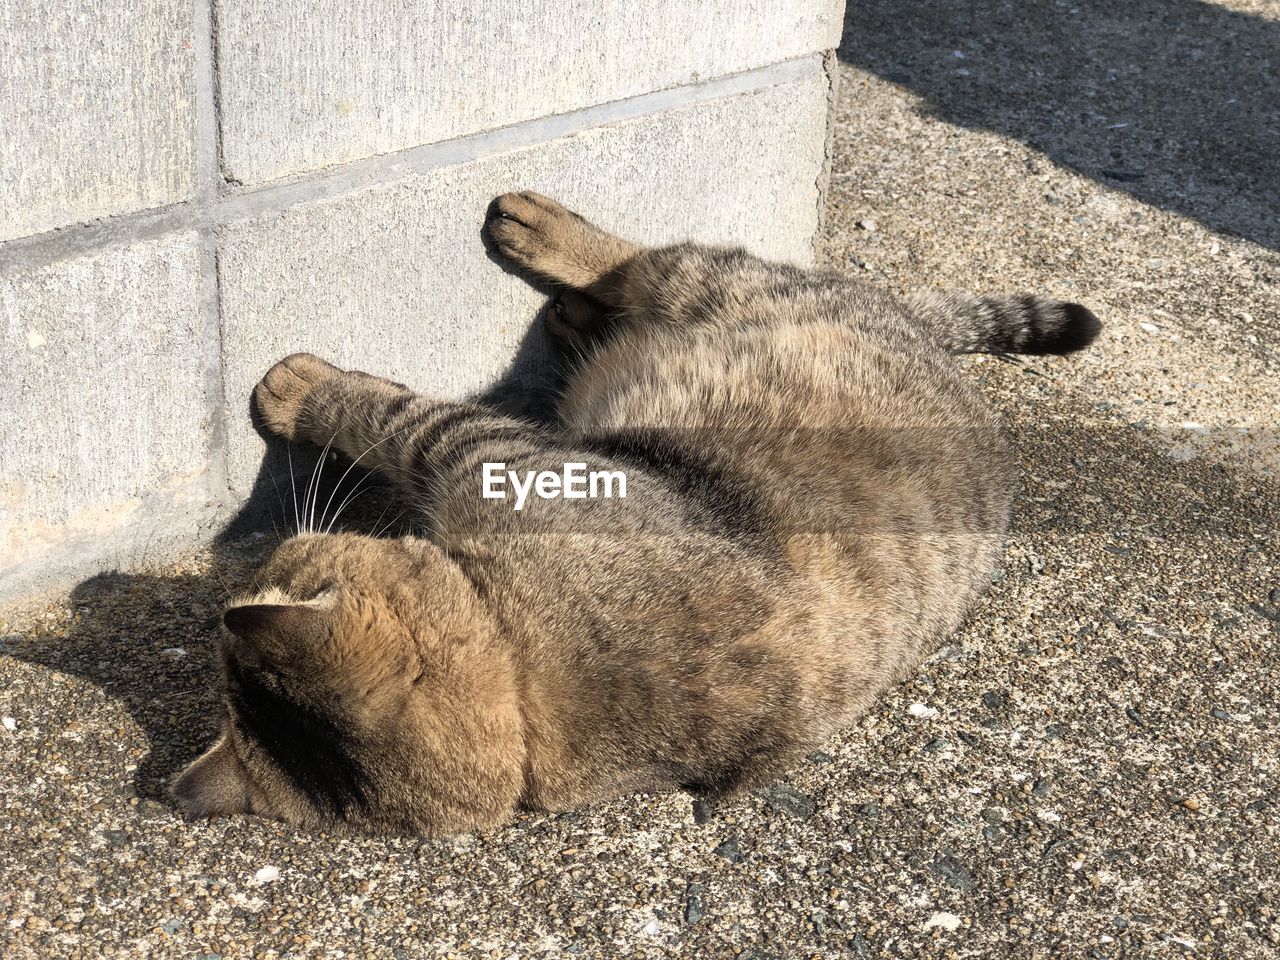 HIGH ANGLE VIEW OF CAT SLEEPING ON THE GROUND